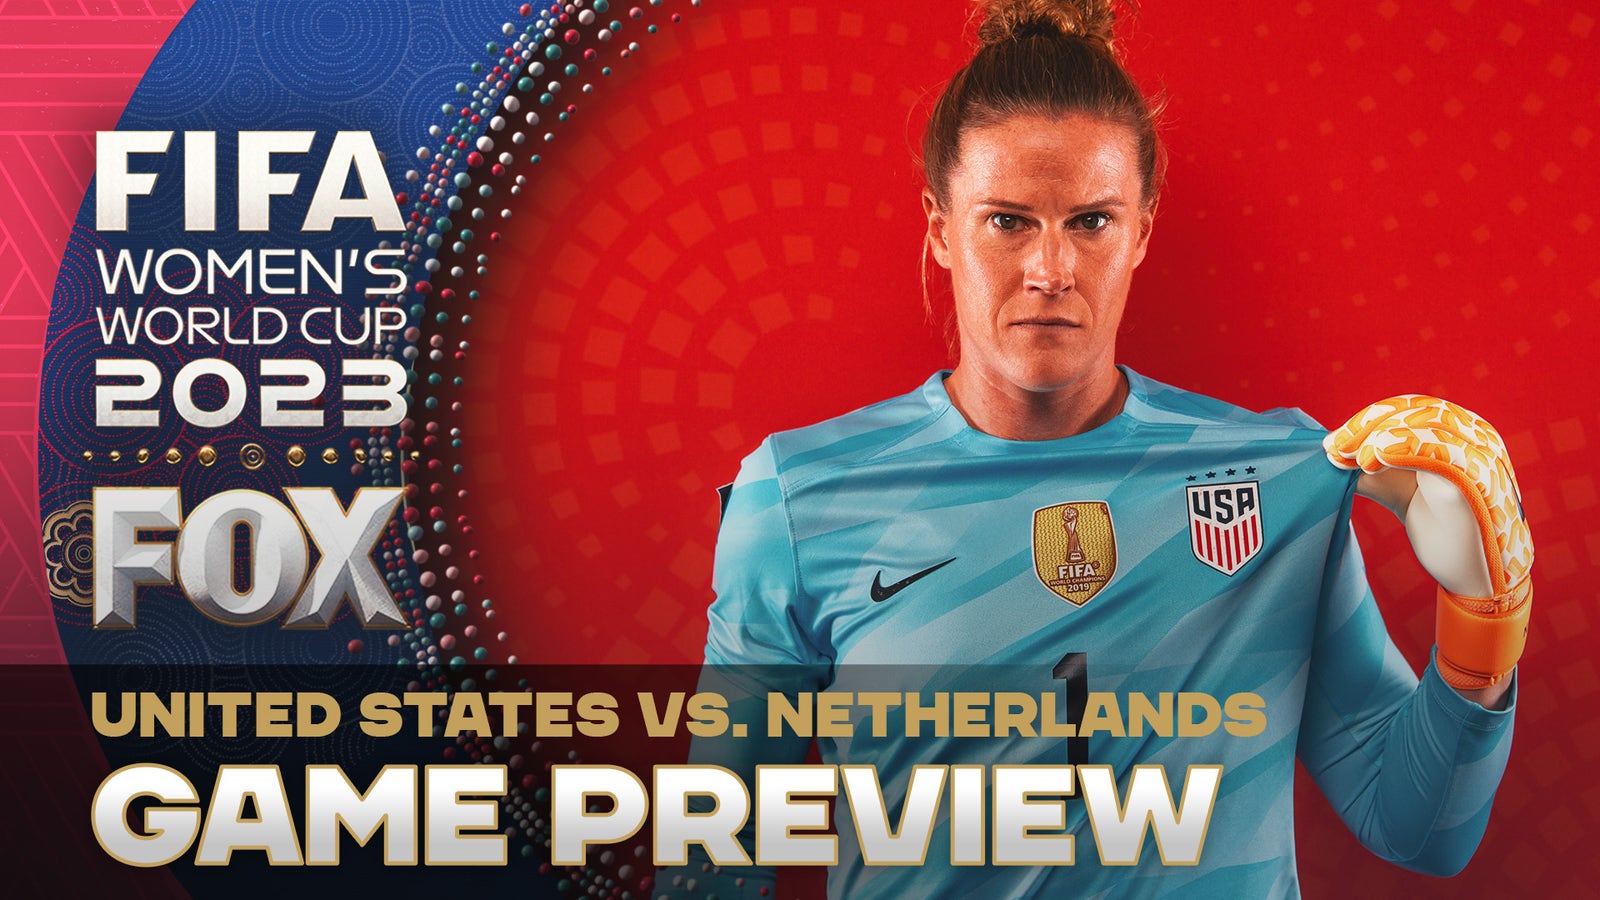 United States vs. Netherlands preview